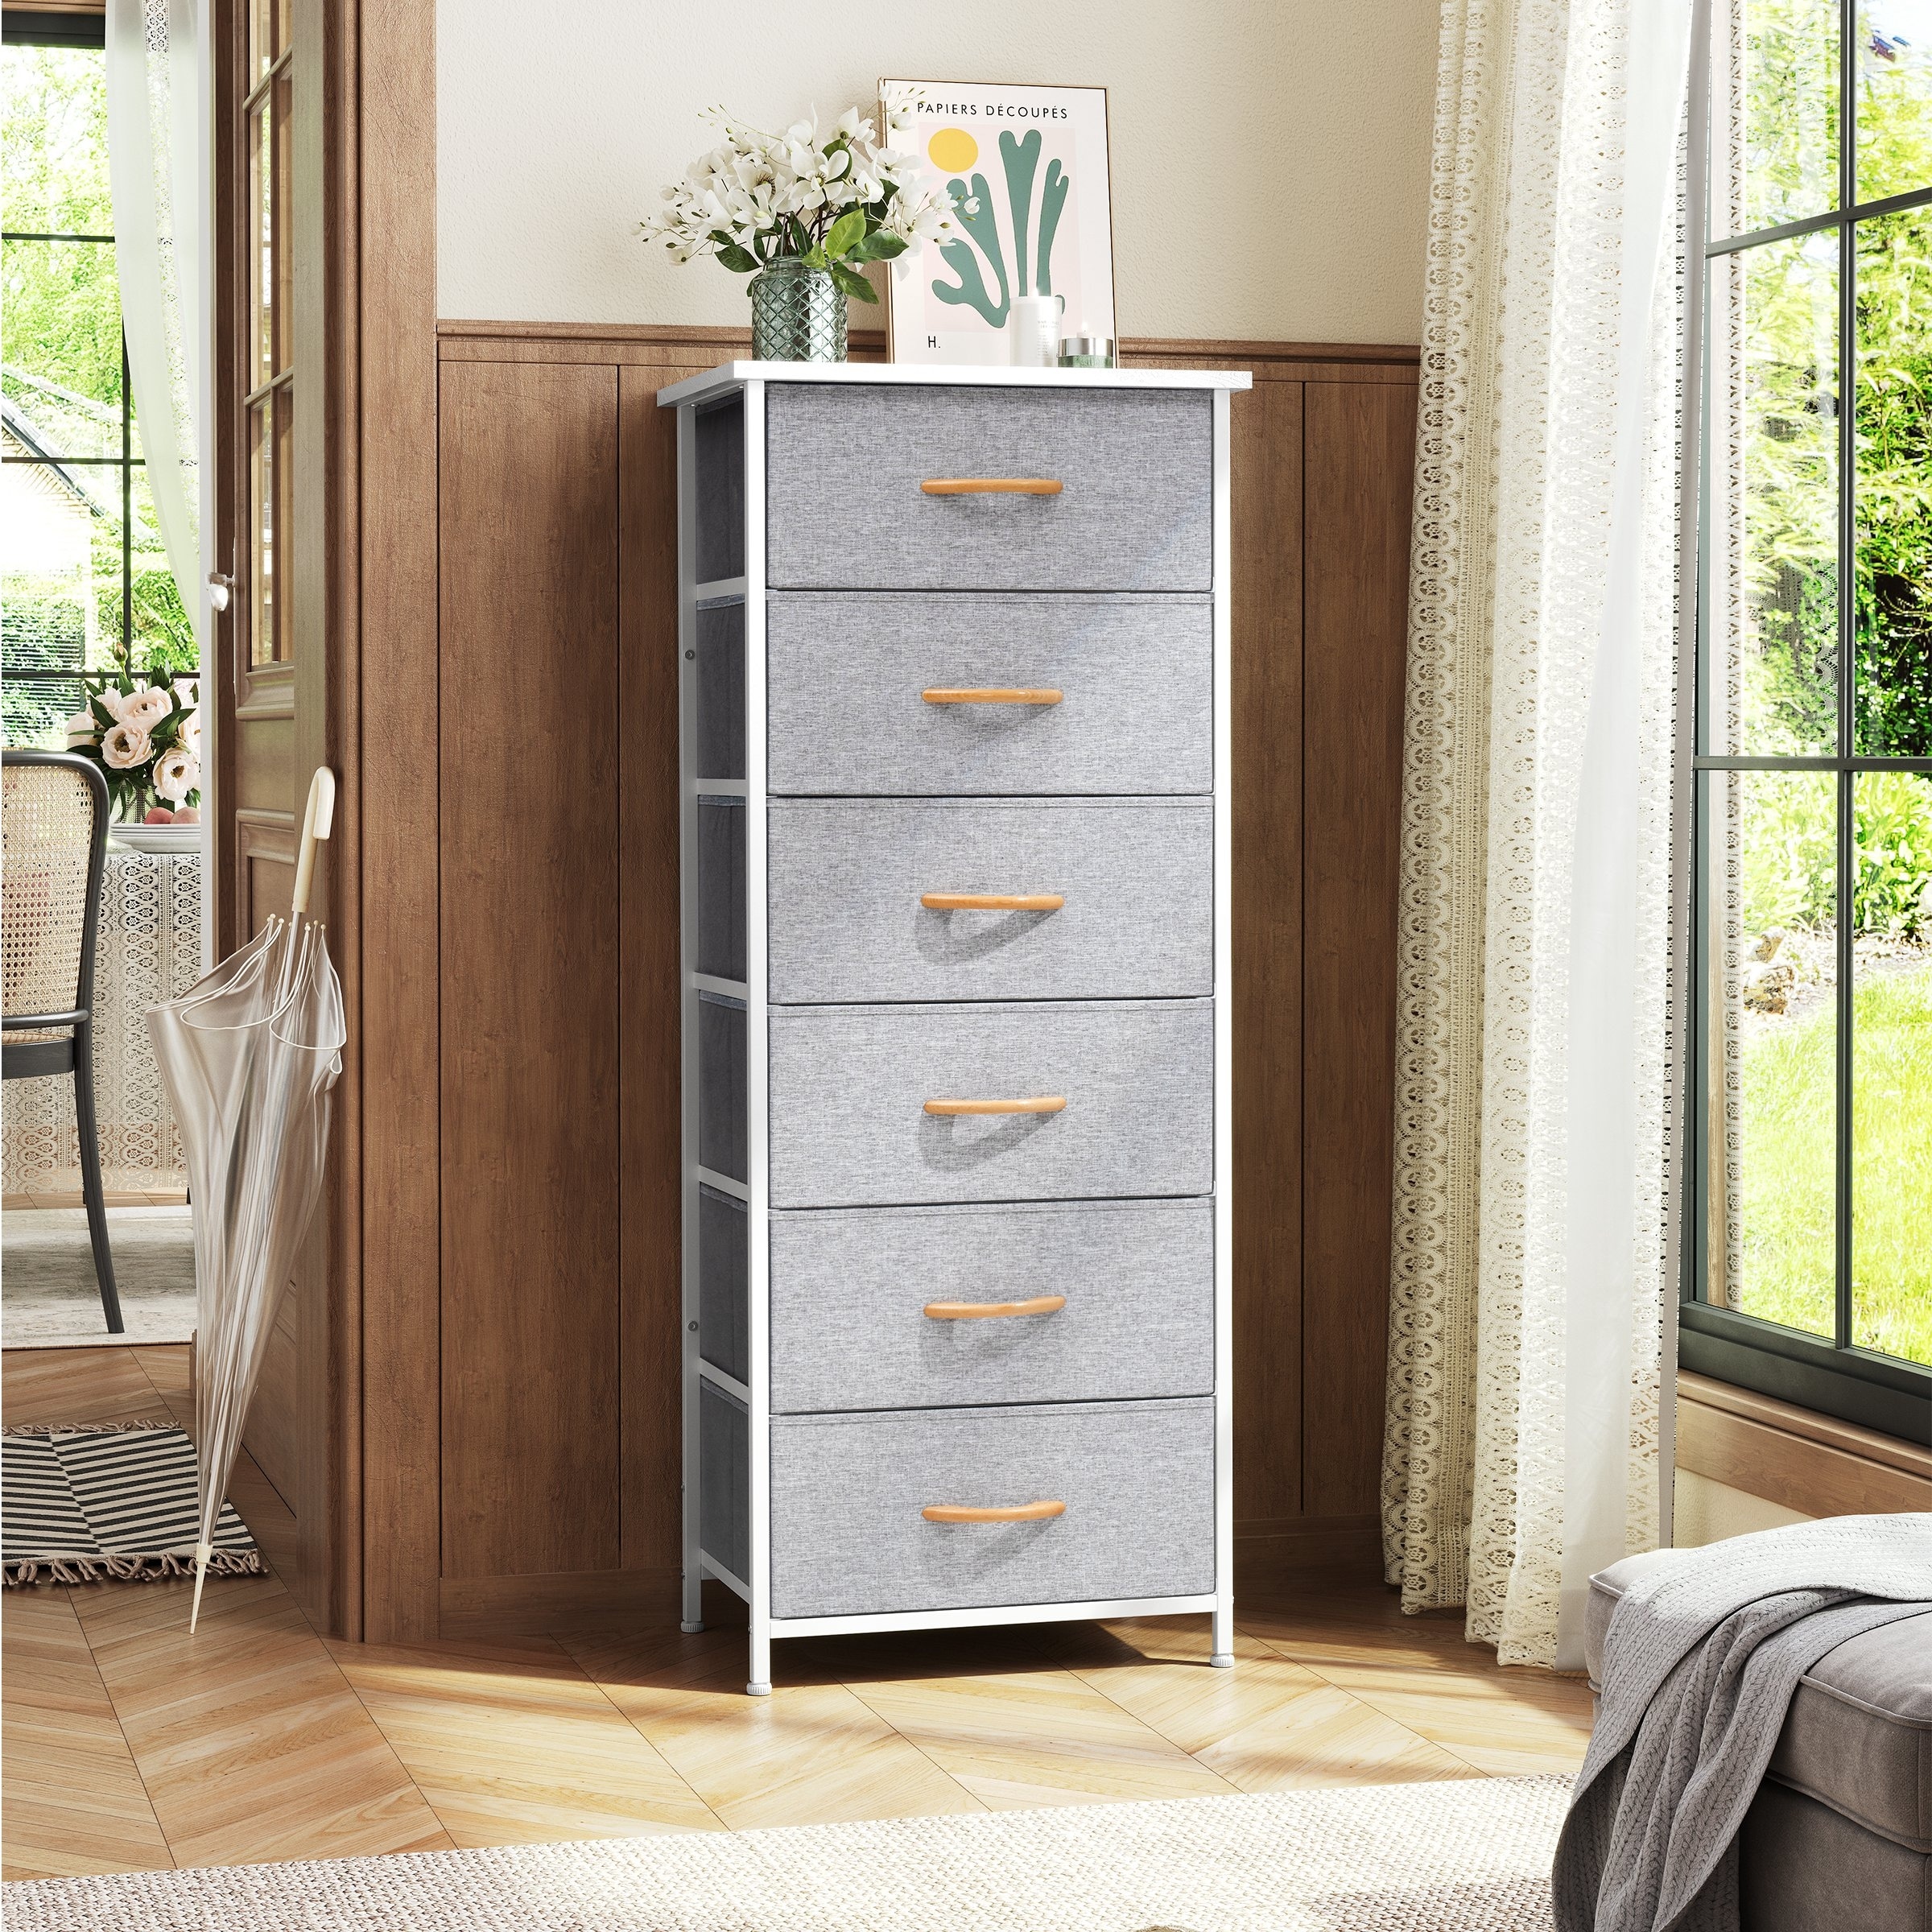 Crestlive Products Vertical Dresser Storage Tower with Wood Top